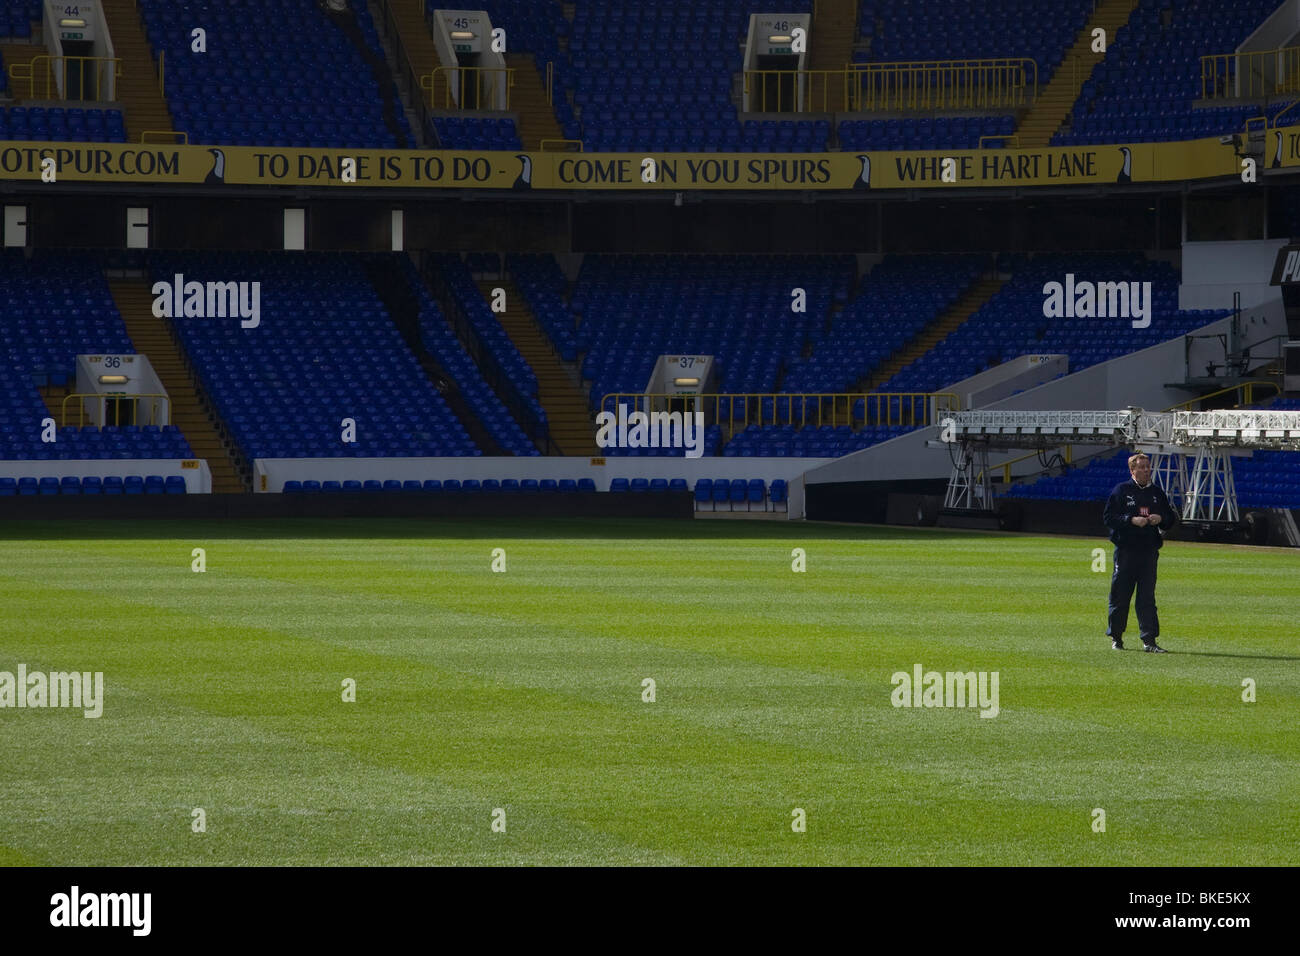 Tottenham hotspurs football stadium with manager Harry Redknapp on the Football pitch Stock Photo